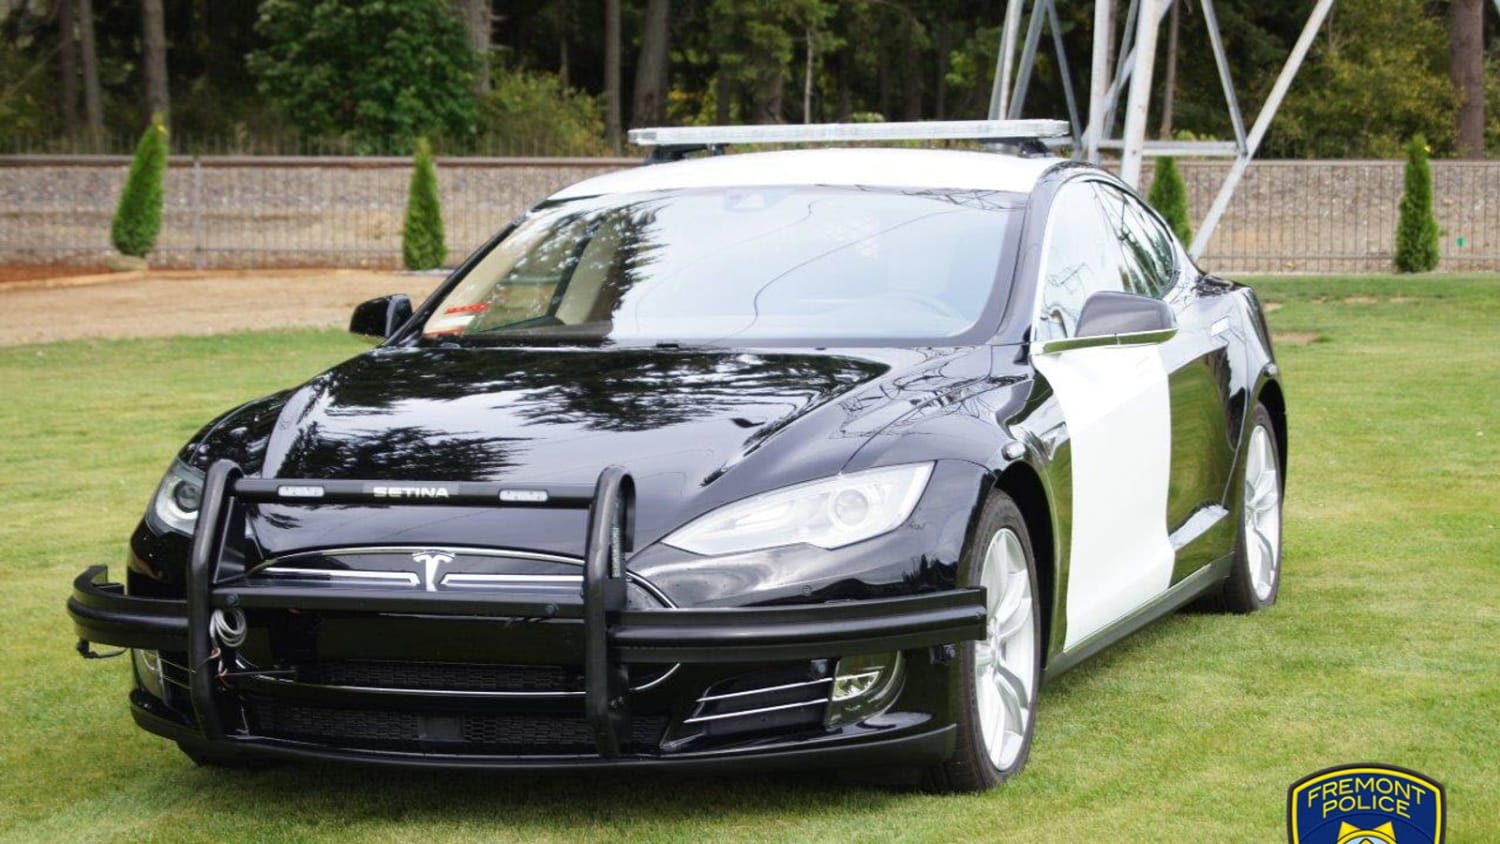 Police officer forced to give up chase as Tesla electric patrol car runs low on battery